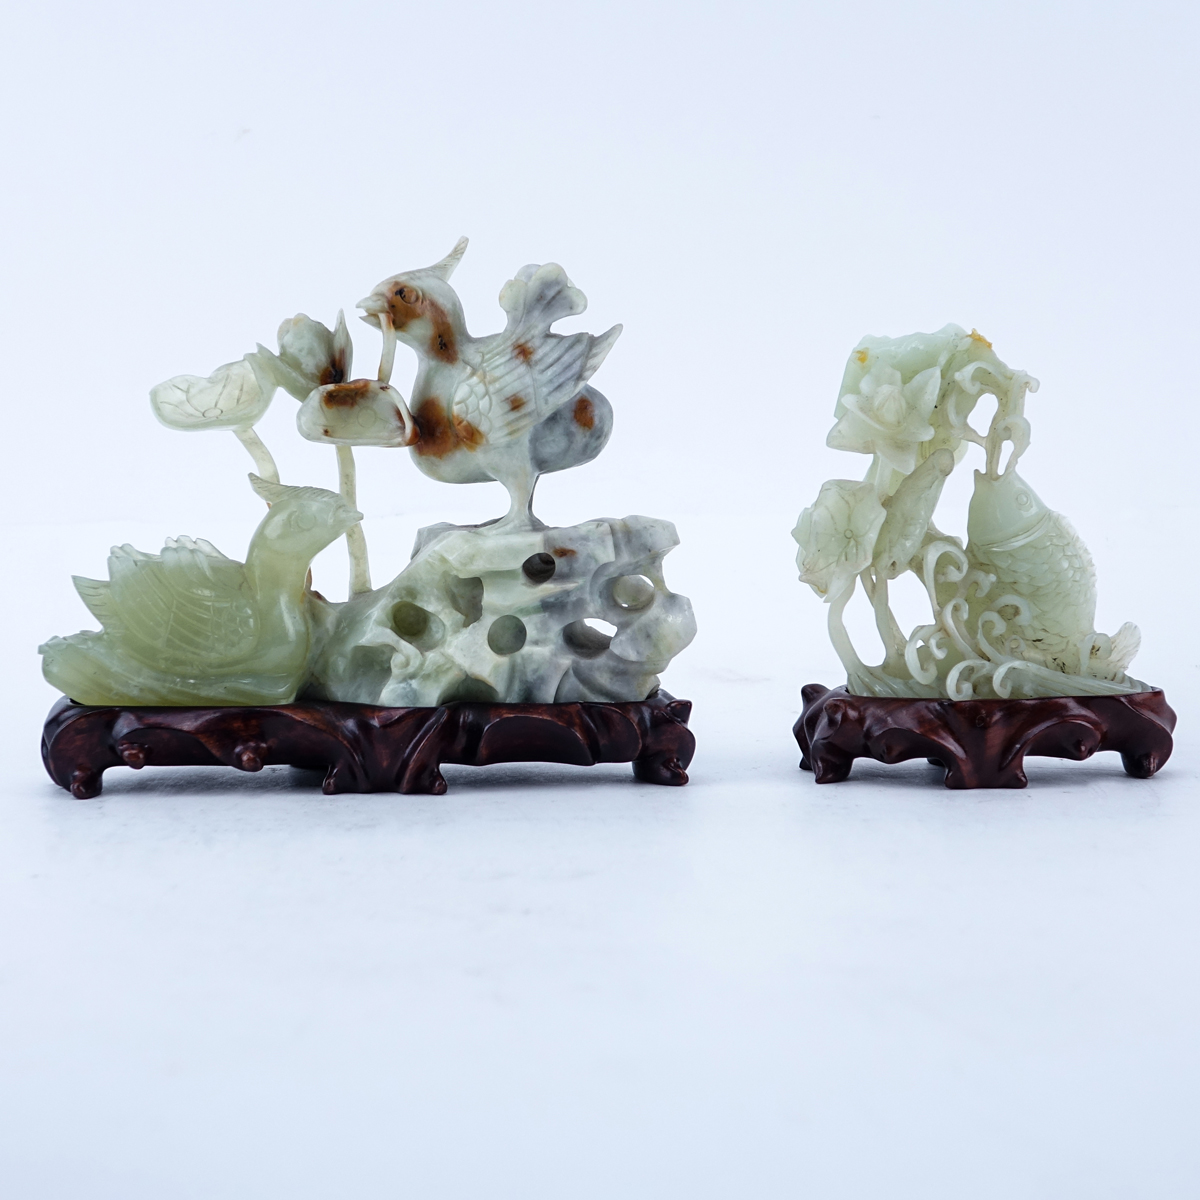 Grouping of Two (2): Chinese Carved Serpentine Jade Group, Chinese Carved Serpentine Jade Fish Group. Each on fitted wooden bases.